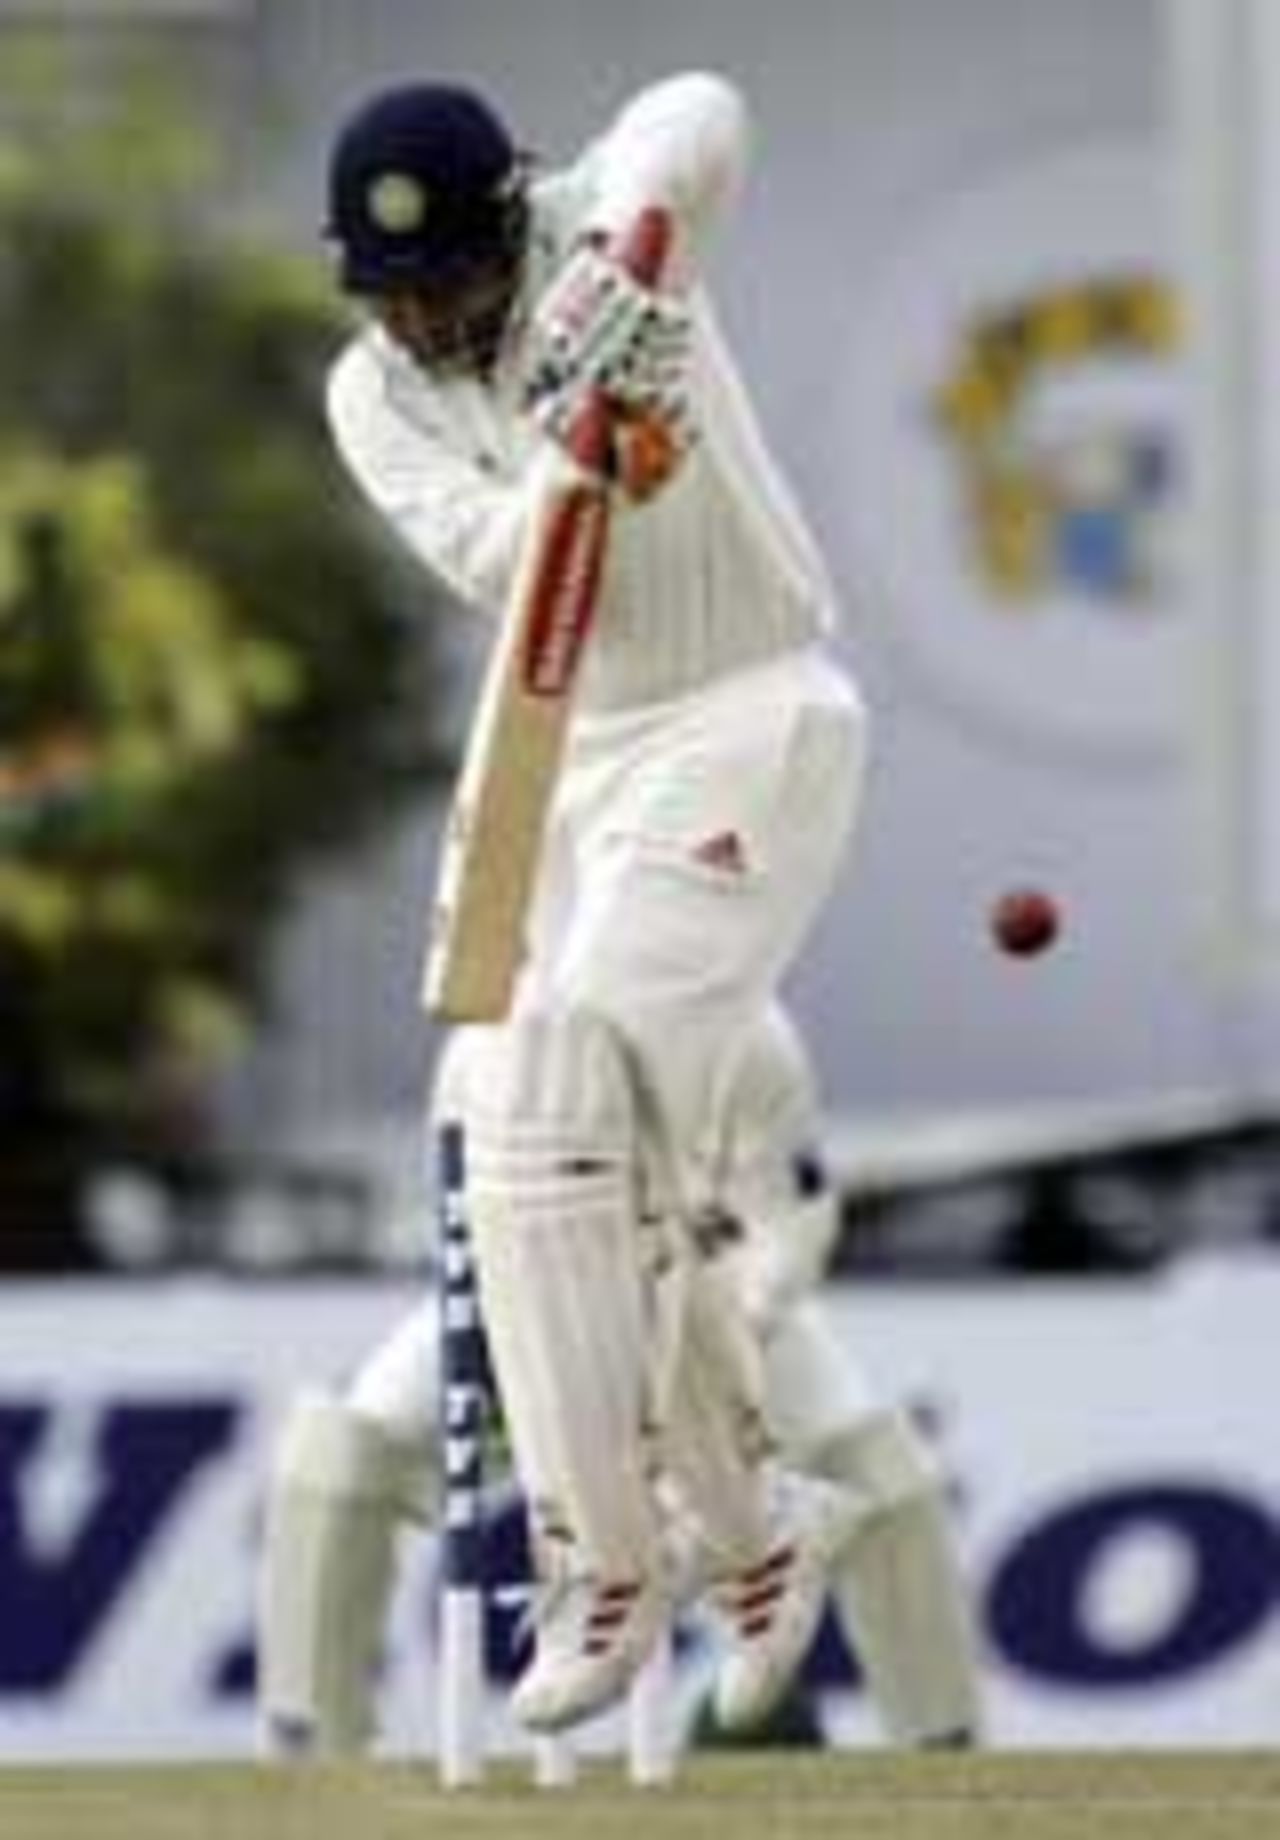 Virender Sehwag flicks on the way to a breezy 95, India v Pakistan, 1st Test, Mohali, March 9, 2005